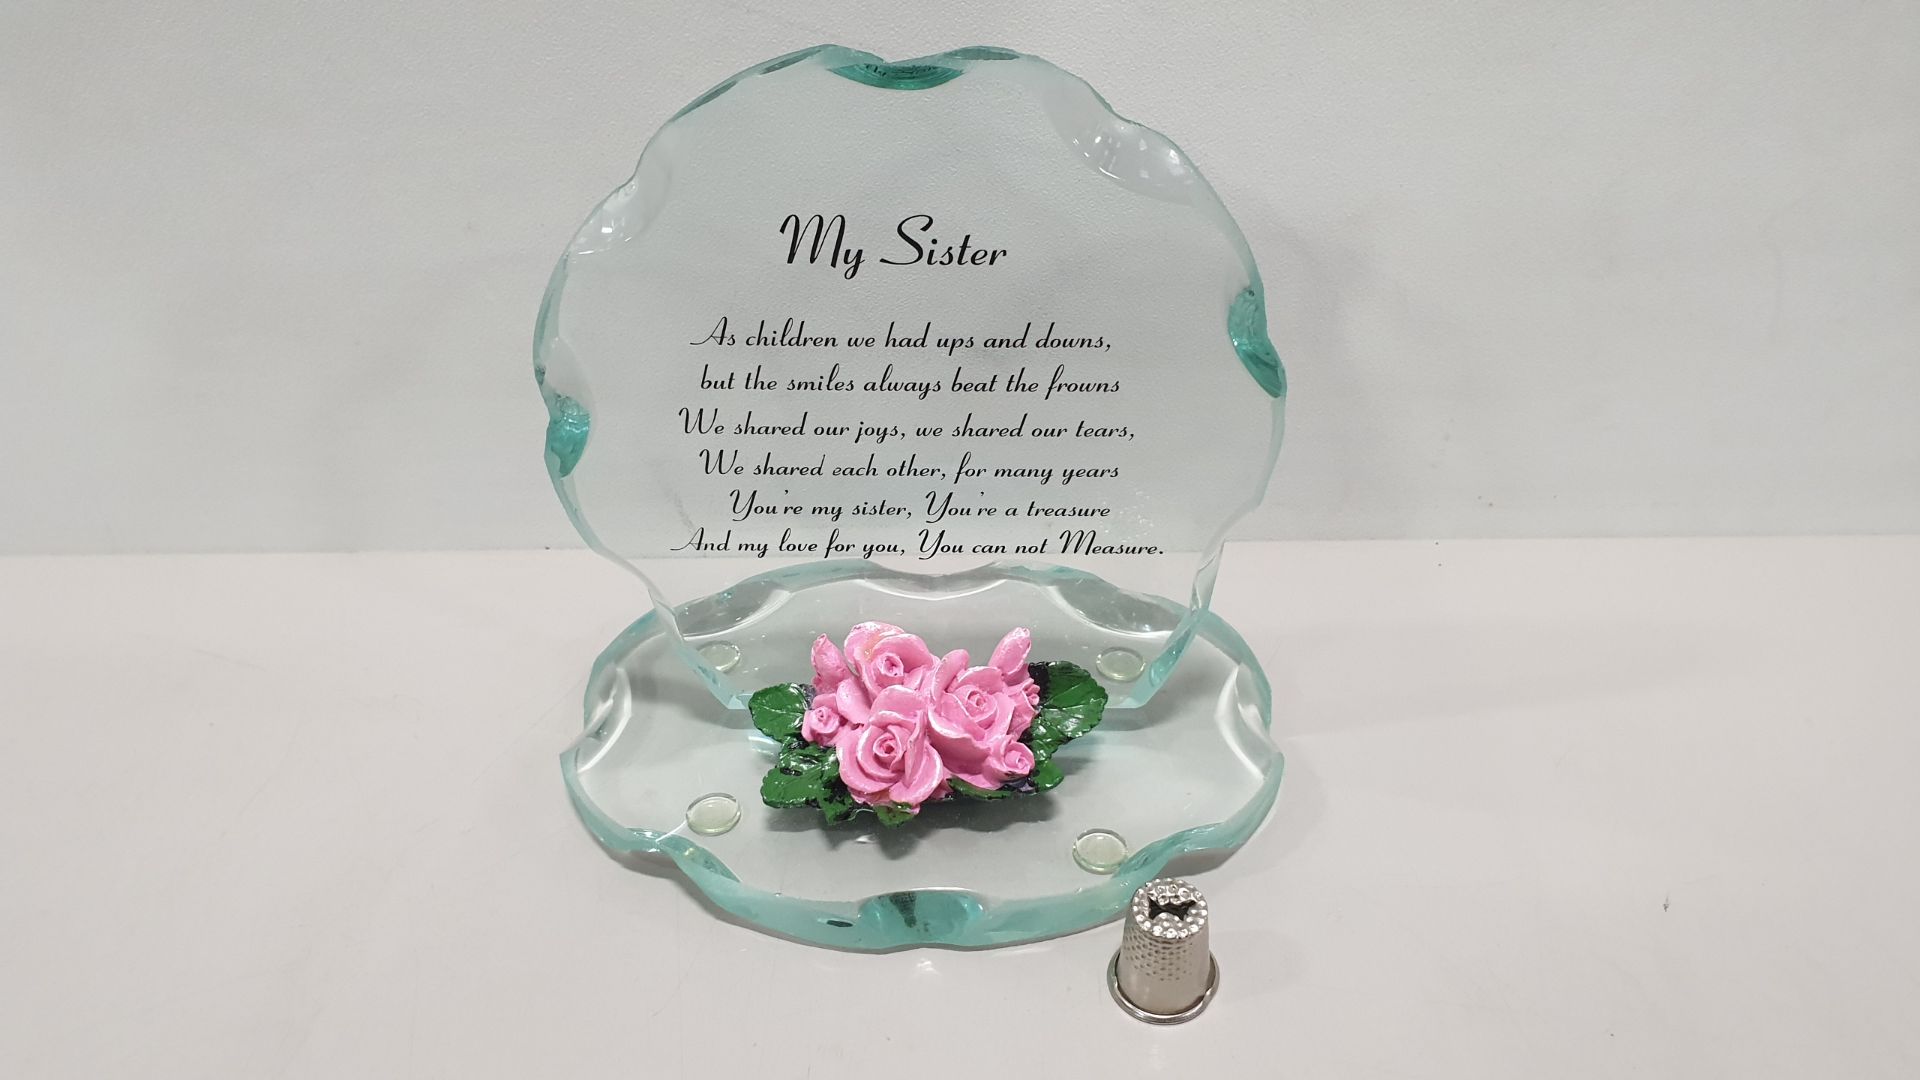 96 X BRAND NEW MAYFLOWER COLLECTABLES MY SISTERS GLASS SCULPTURED PLAQUE - WITH SPECIAL MESSAGE IN 8